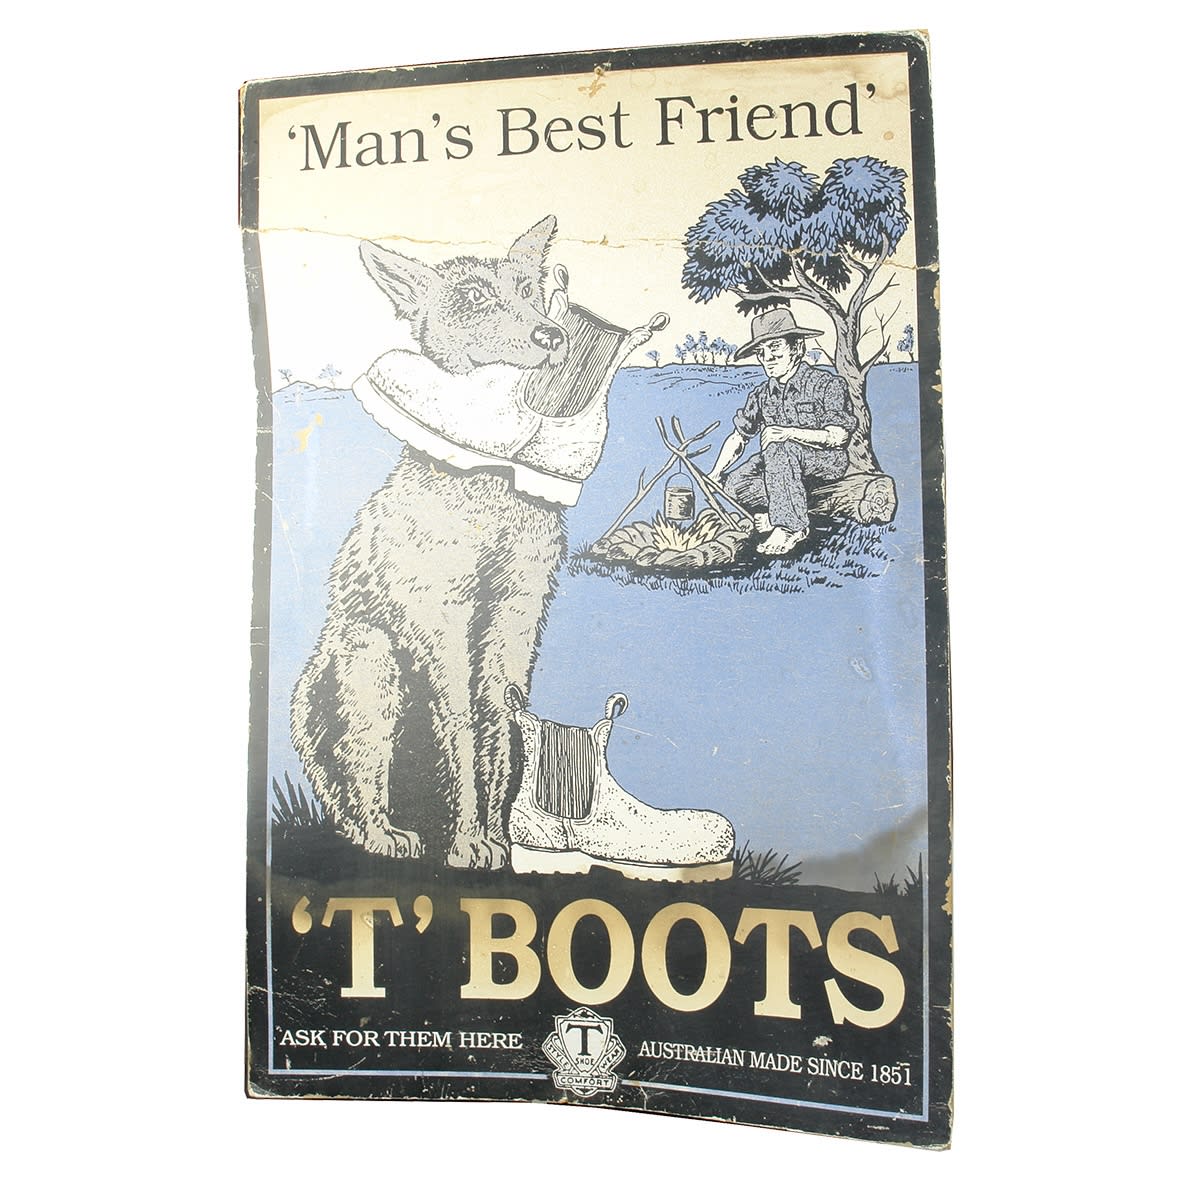 Sign. 'T' Boots, Dog With Boot, Australian Made Since 1851. Cardboard.